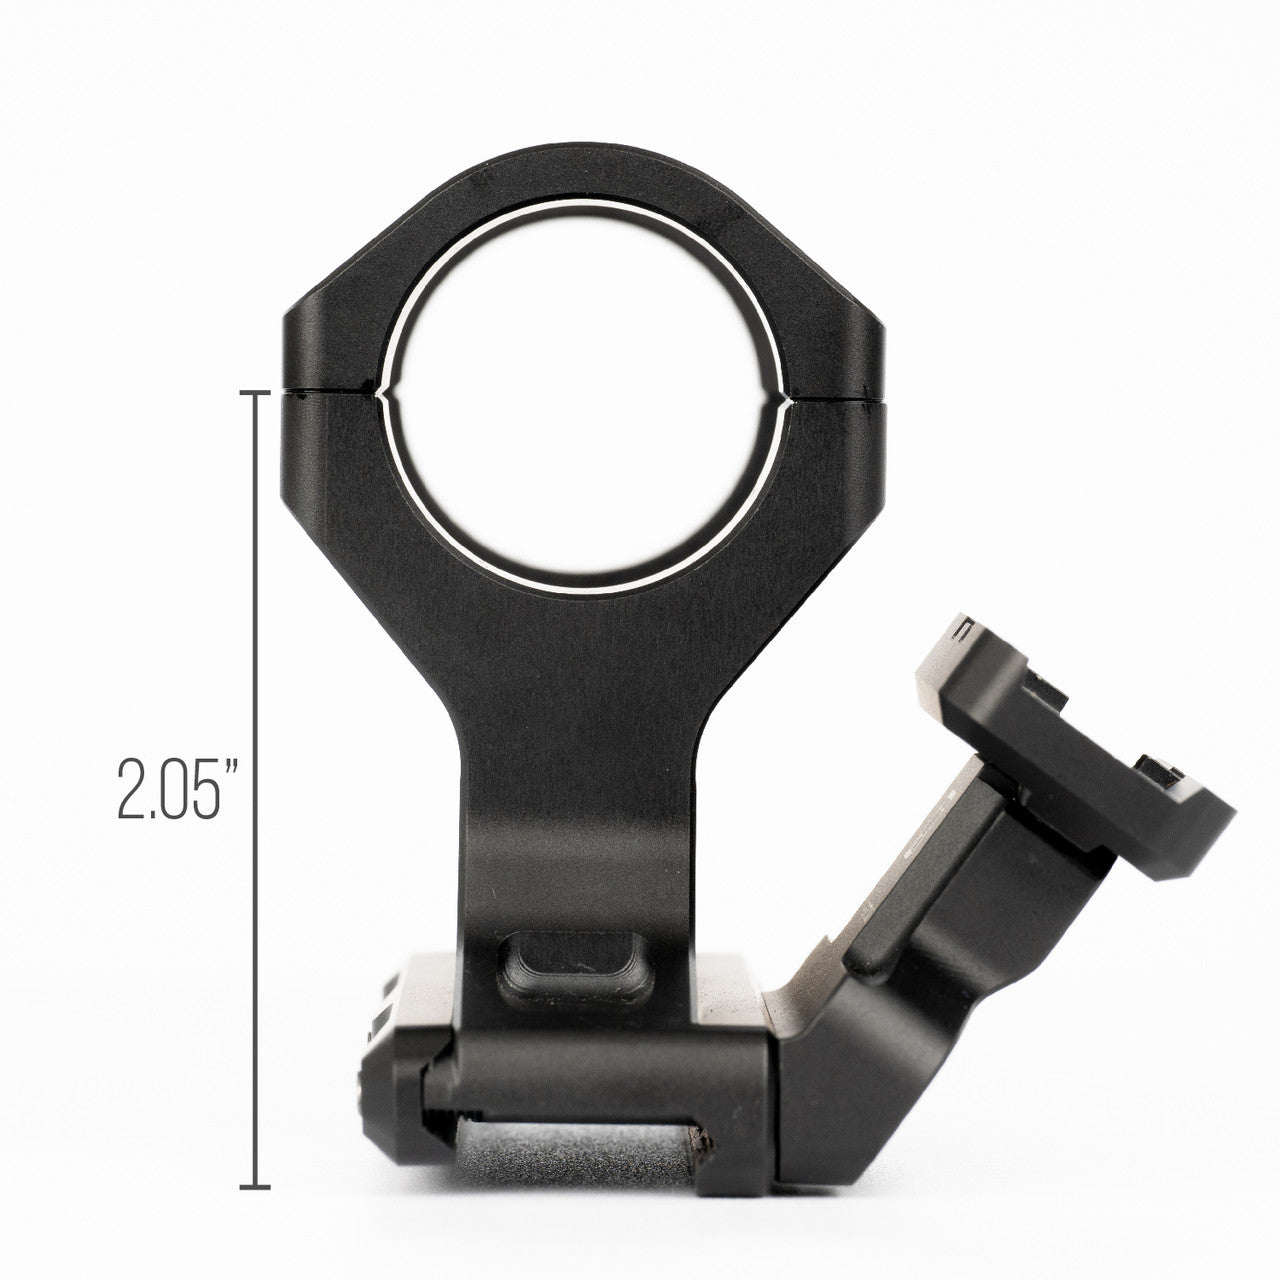 PTS UNITY TACTICAL FAST LPVO OPTICS MOUNT SET (INCL RMR AND AIMPOINT RDS OFFSET MOUNTS)